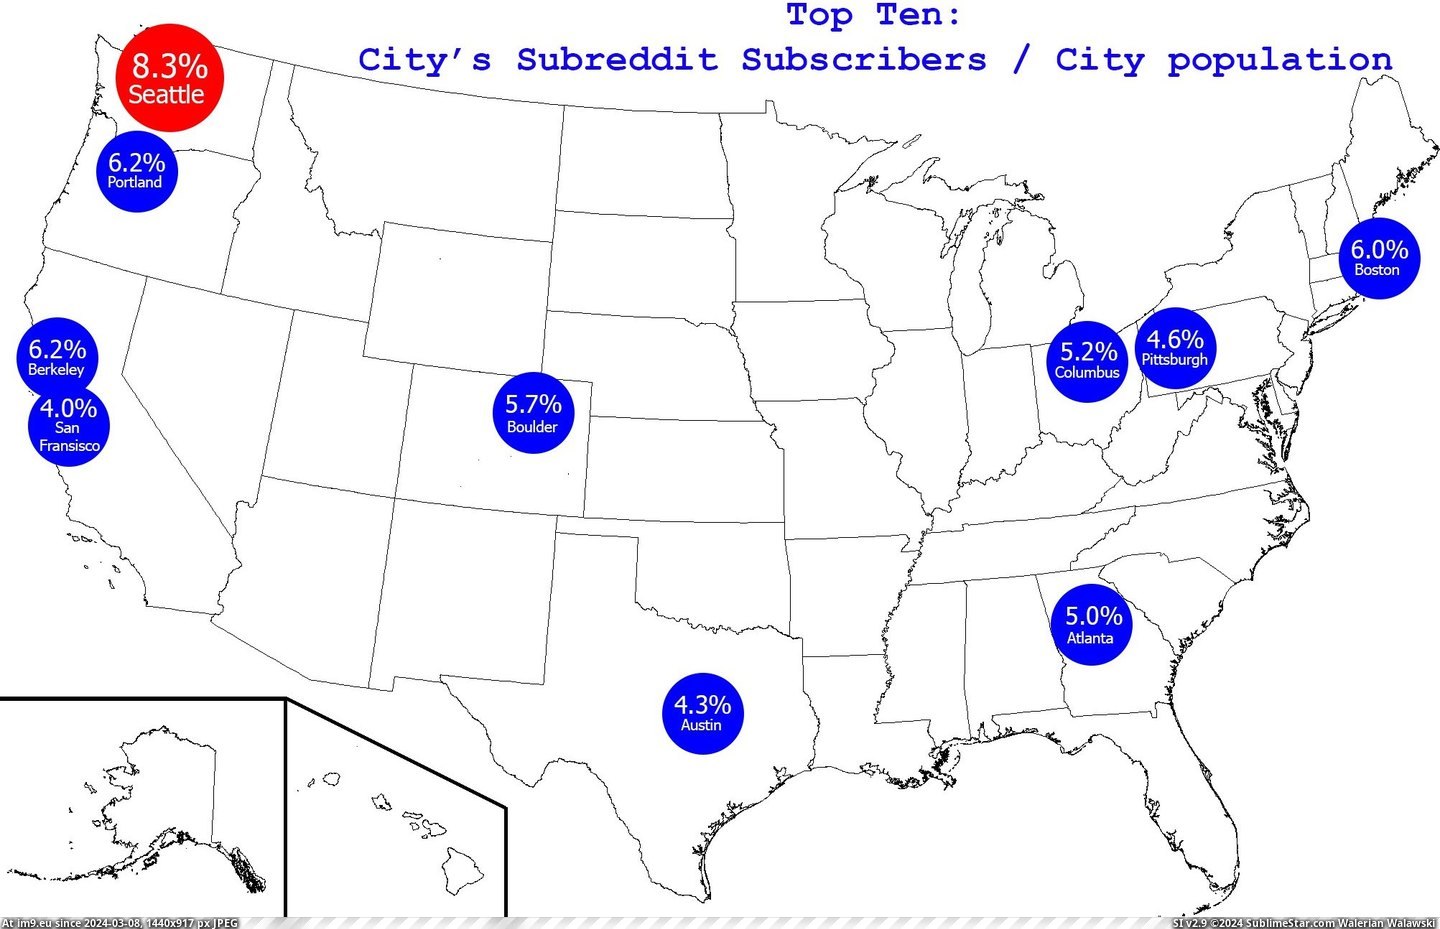 #City #Data #Subscribed #Population [Dataisbeautiful] How Much of a City's Population is Subscribed to Its Subreddit (More data in comments) [OC] Pic. (Изображение из альбом My r/DATAISBEAUTIFUL favs))